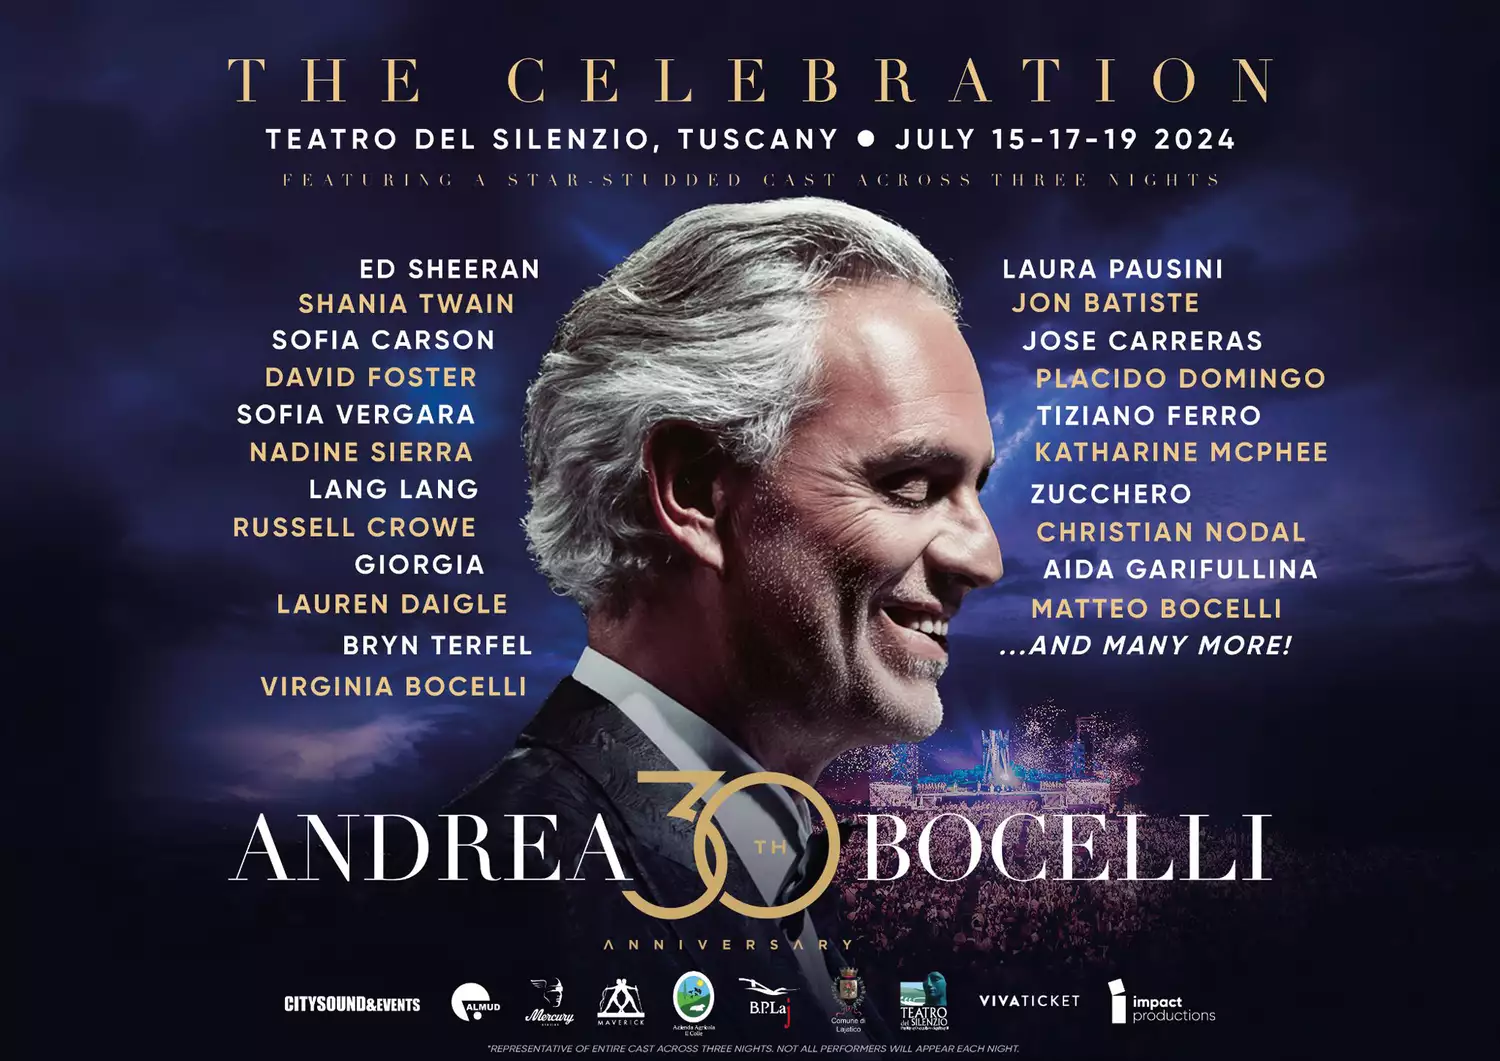 Andrea Bocelli Honors His 3 Decades In The Music Business With A 3-Day Concert Event And Concert Film, Yours Truly, News, May 18, 2024